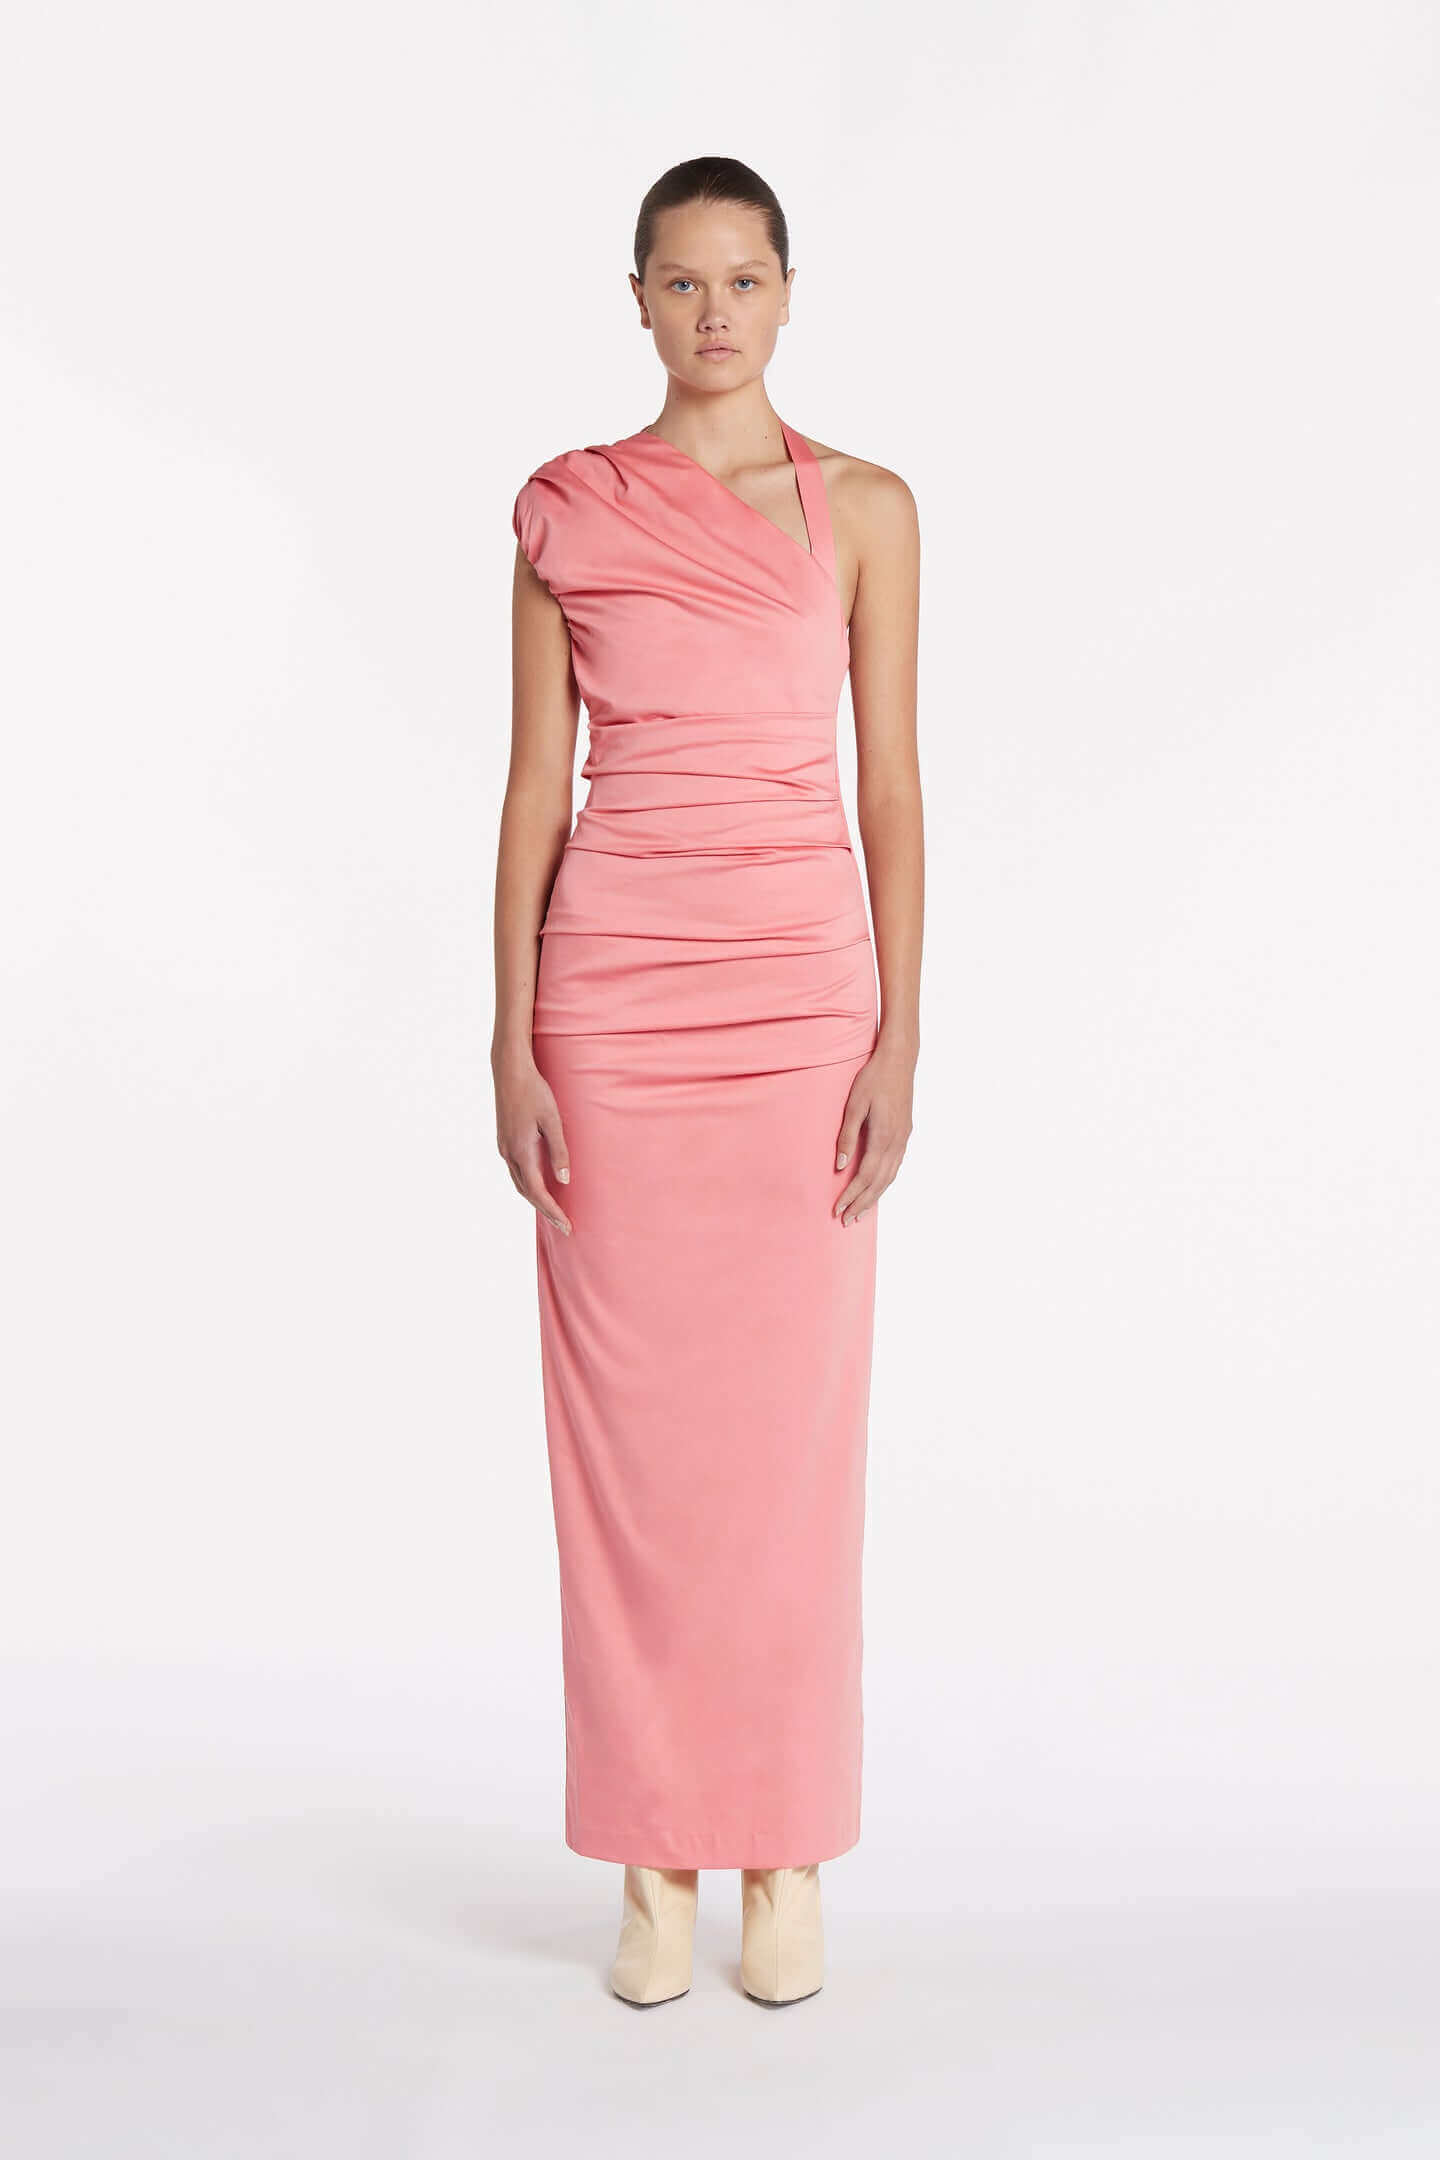 SIR Giacomo Gathered Gown in Pink available at TNT The New Trend Australia. Free shipping on orders over $300 AUD.